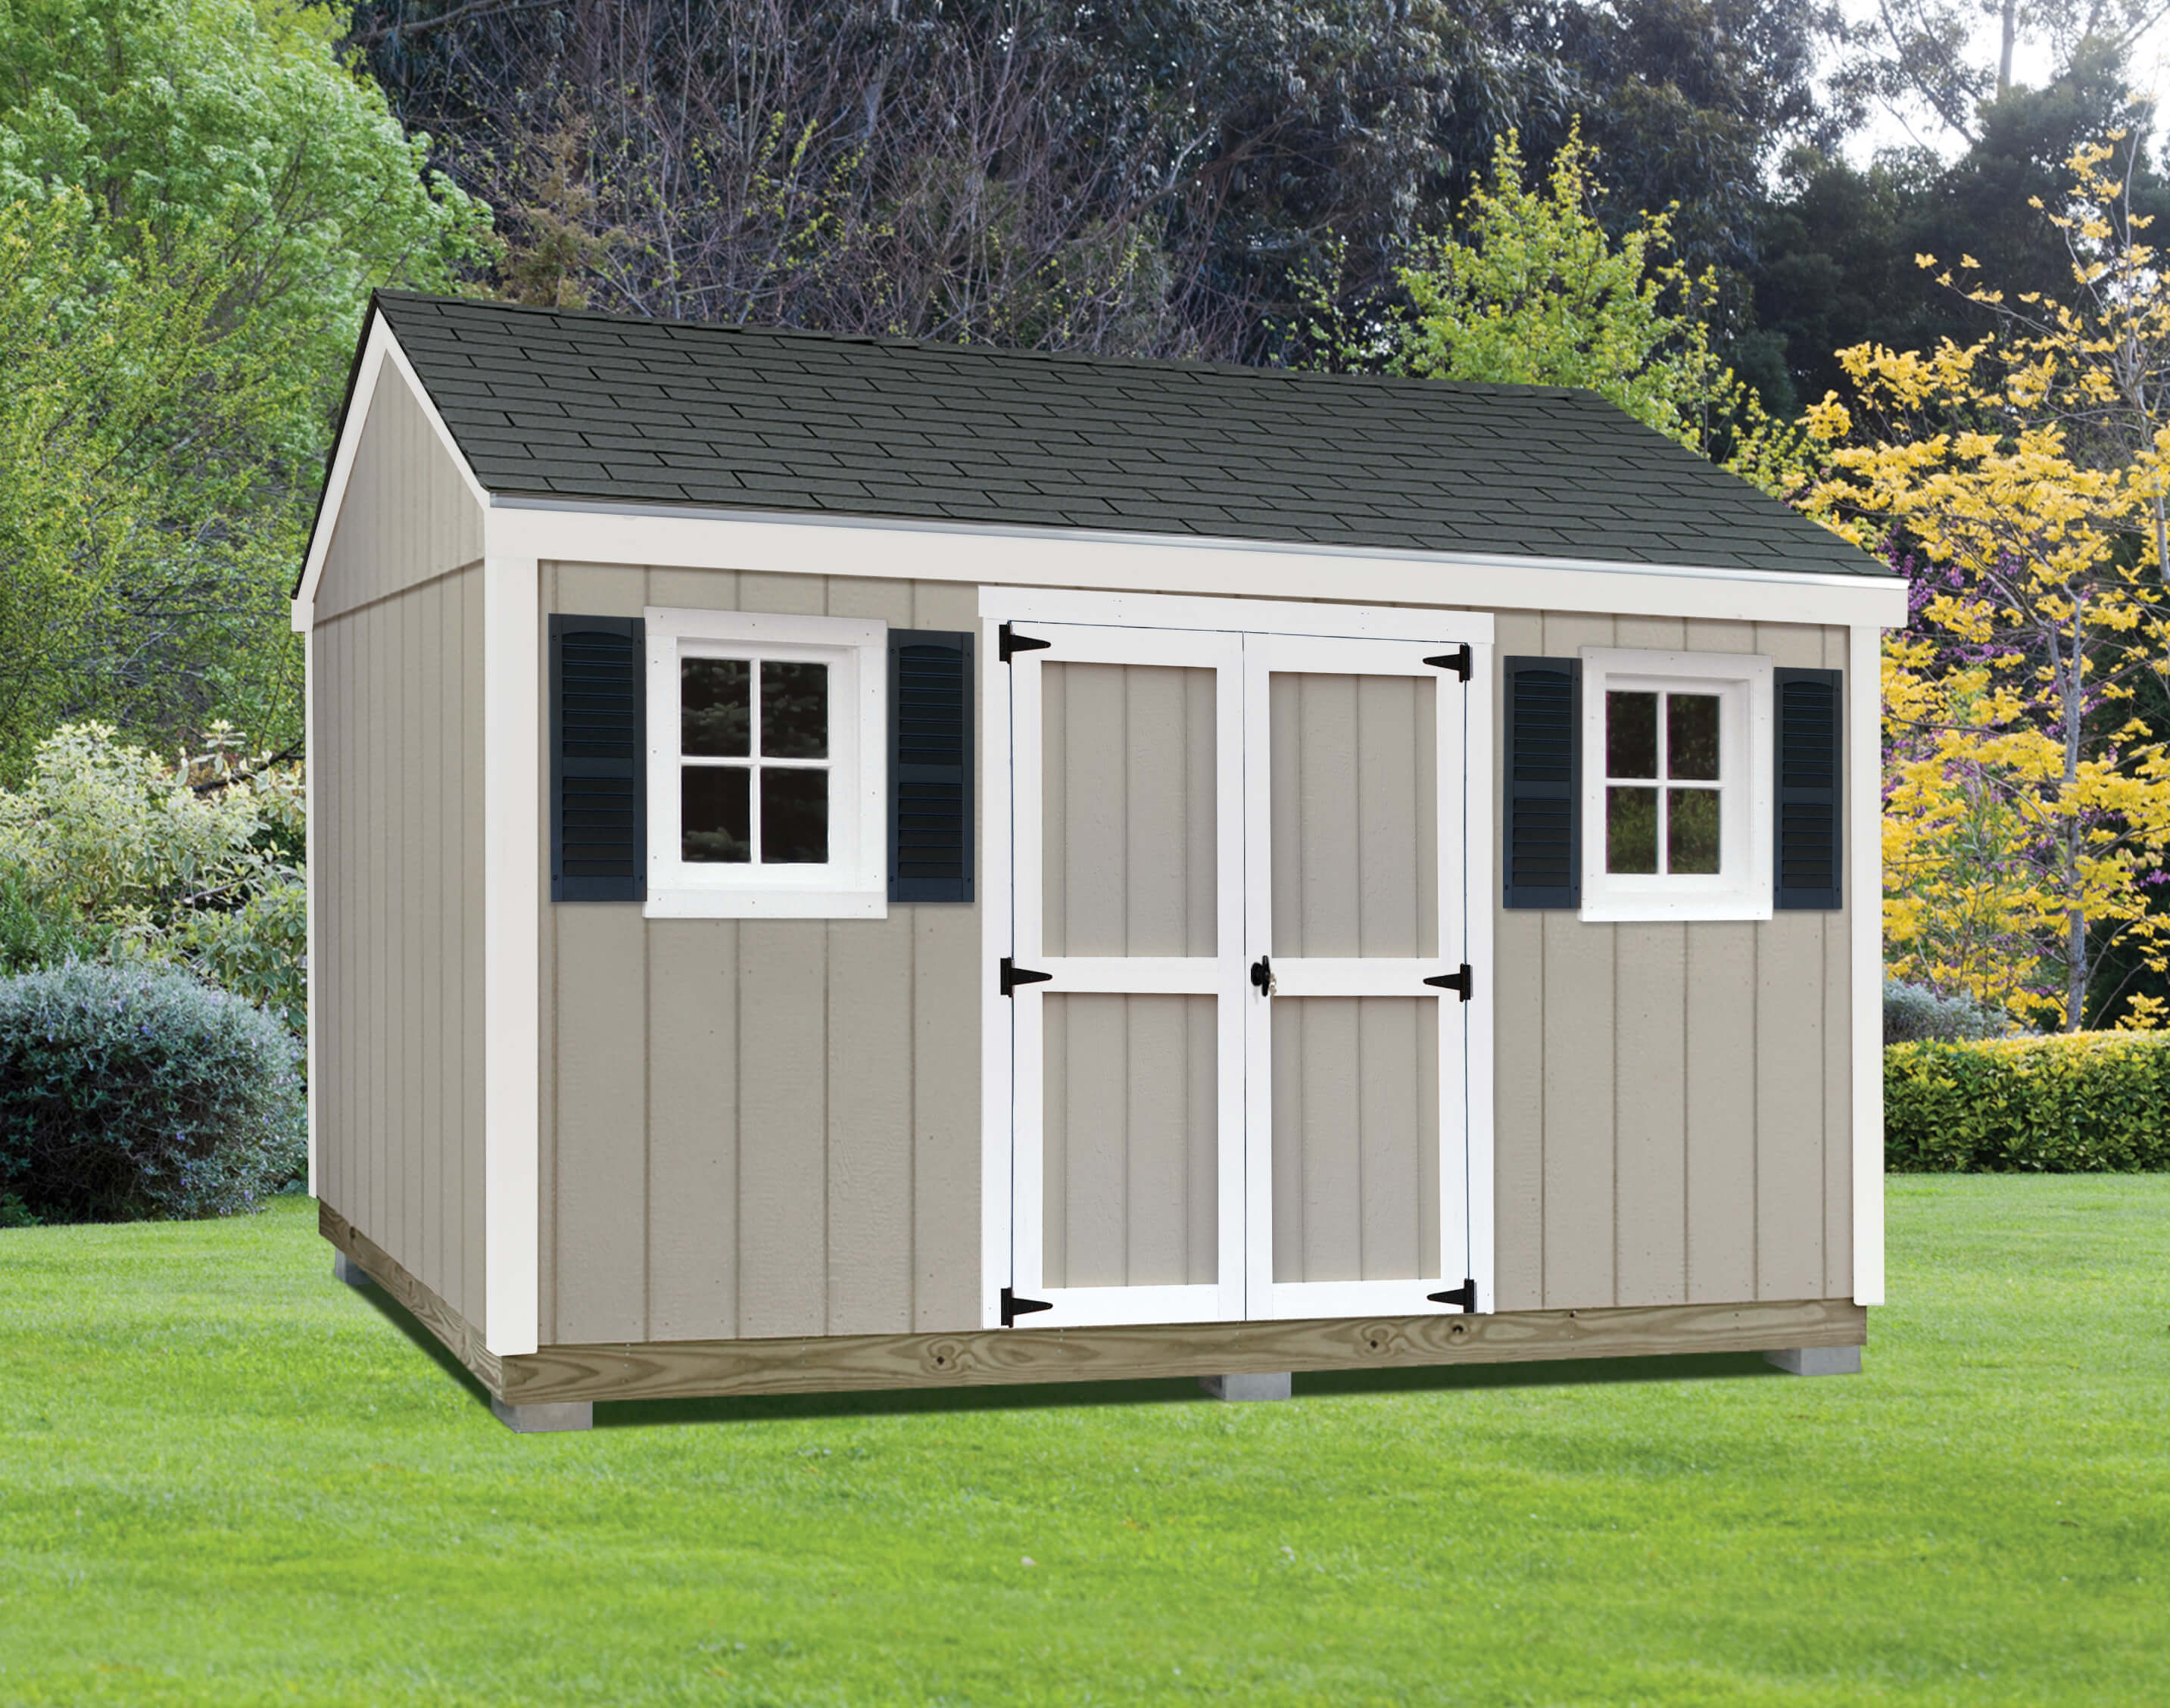 Get Prefab Sheds to make your construction faster